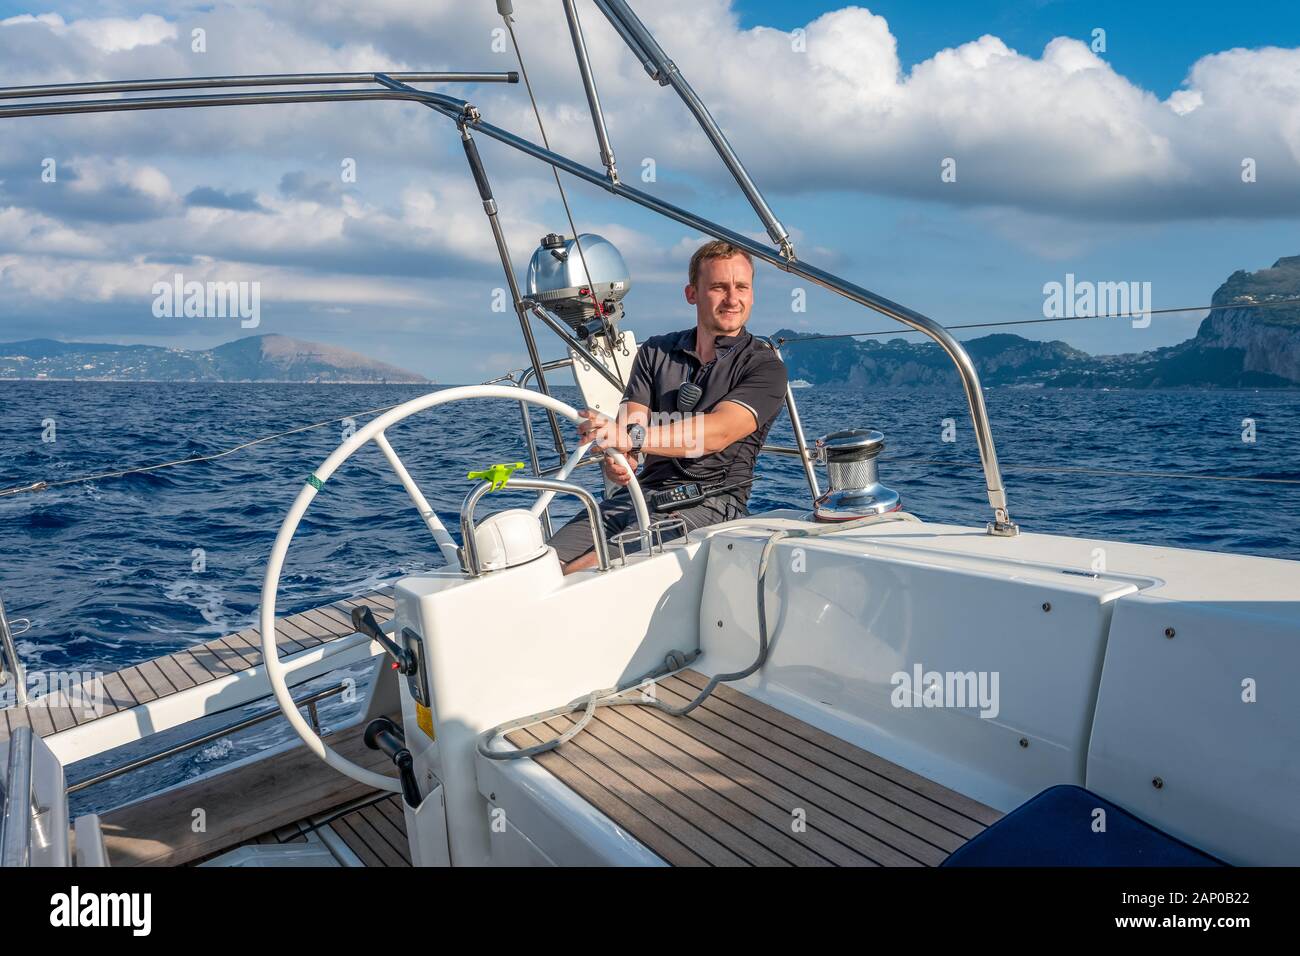 Sailor at the helm of modern sailing yacht. Mediterranean sea, near Ischia island and Capri island on the background, Italy. Stock Photo